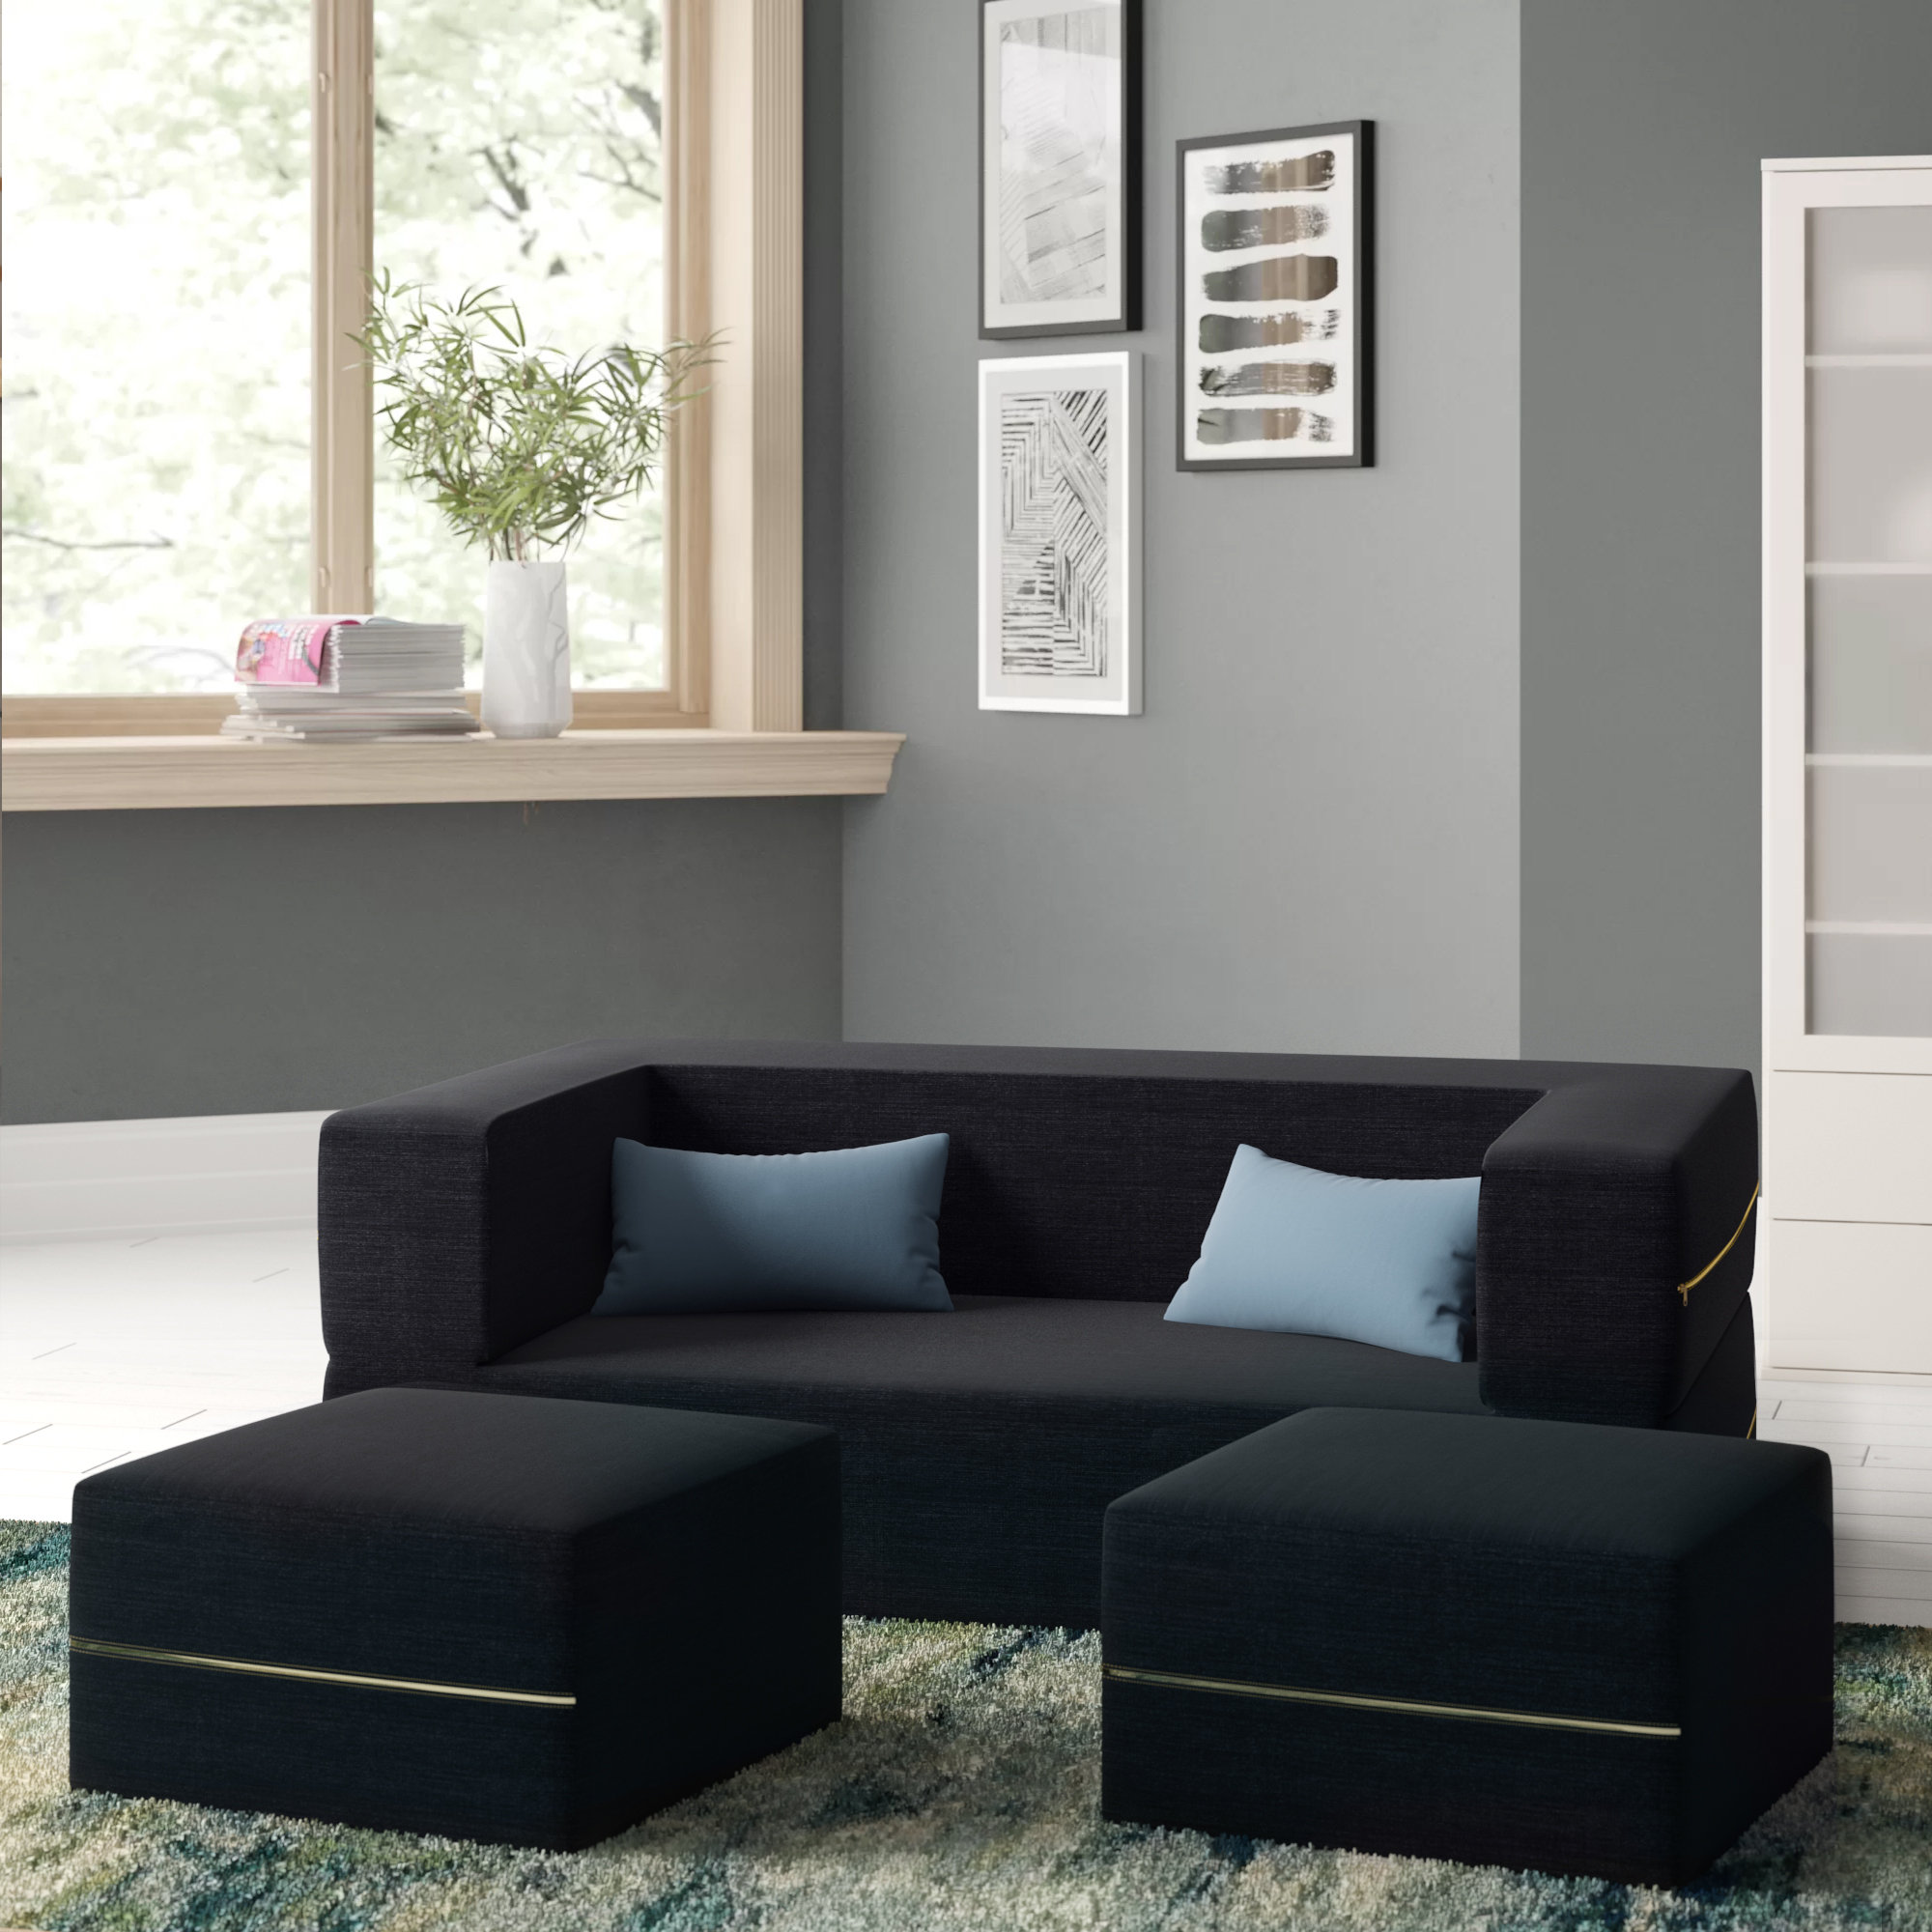 The Paulestein Denim 2 Pc. Power Sofa, Loveseat is available at Discount  Furniture Center proudly serving South Hill and Farmville, VA and  surrounding areas!